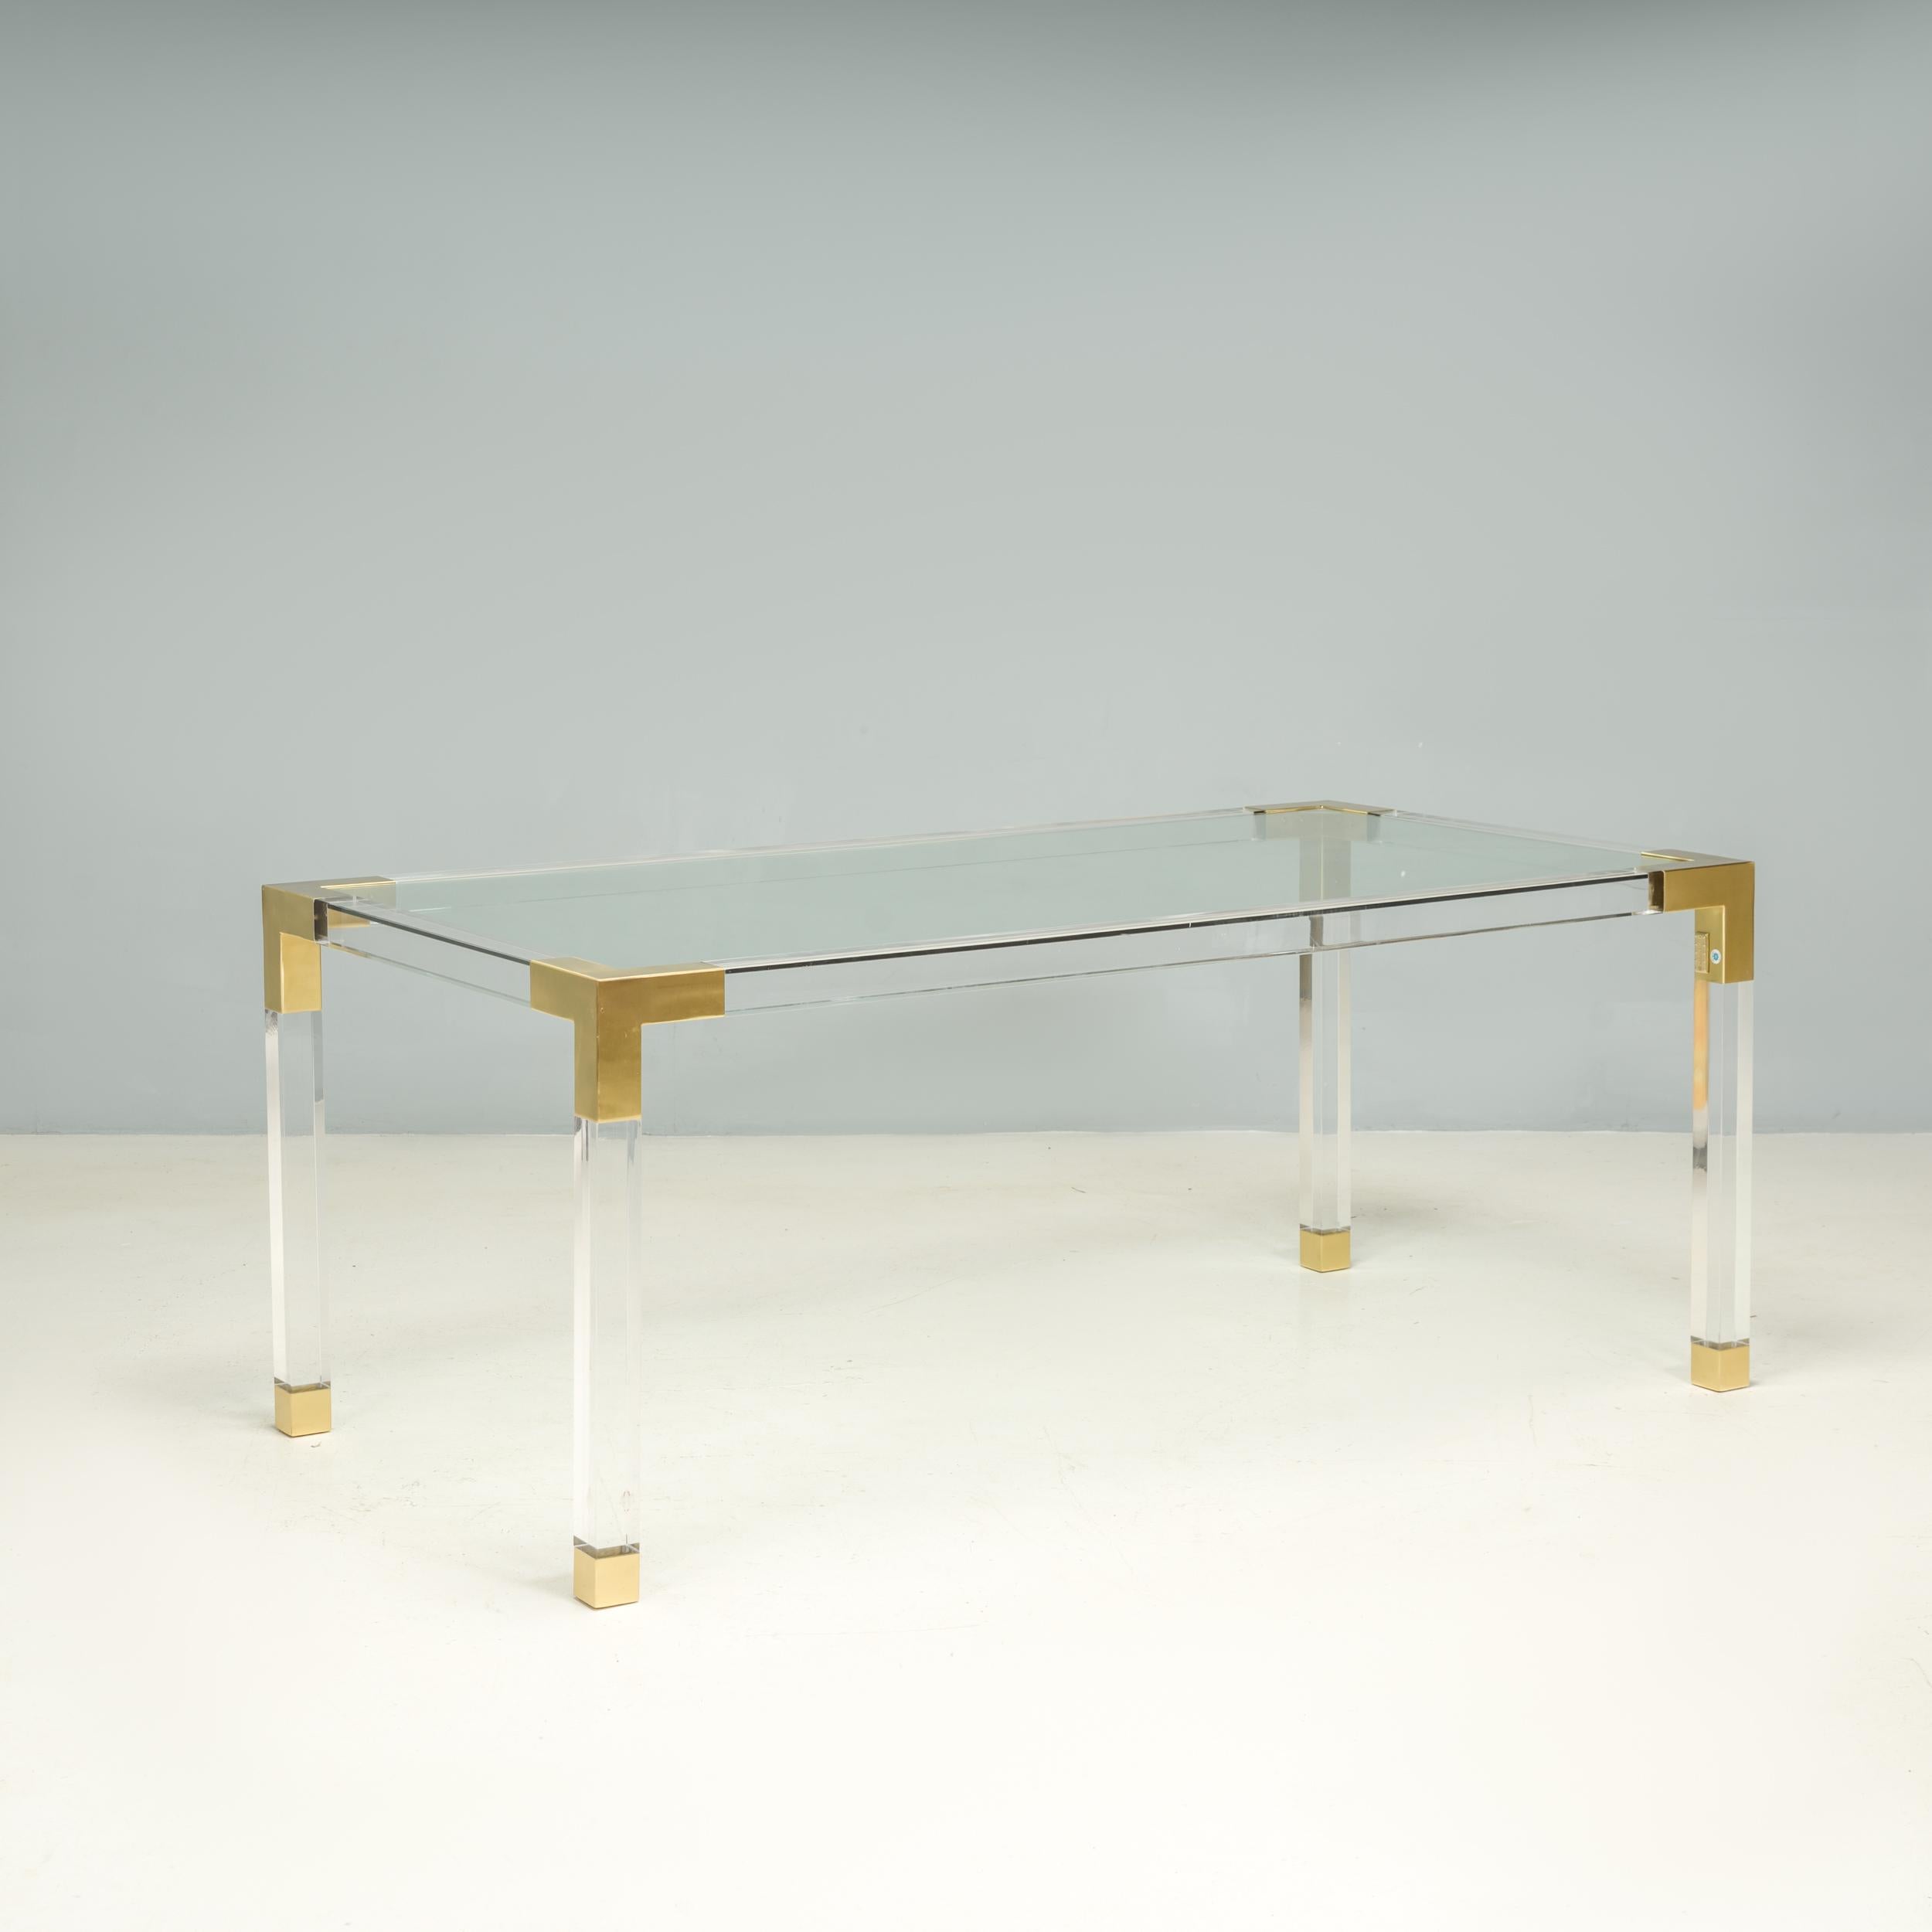 Designed by Jonathan Adler, this contemporary Jacques dining table has an elegant mid century aesthetic. 

Constructed from clear acrylic, the large rectangular dining table features brushed brass corners and feet.

Despite the size, the clear